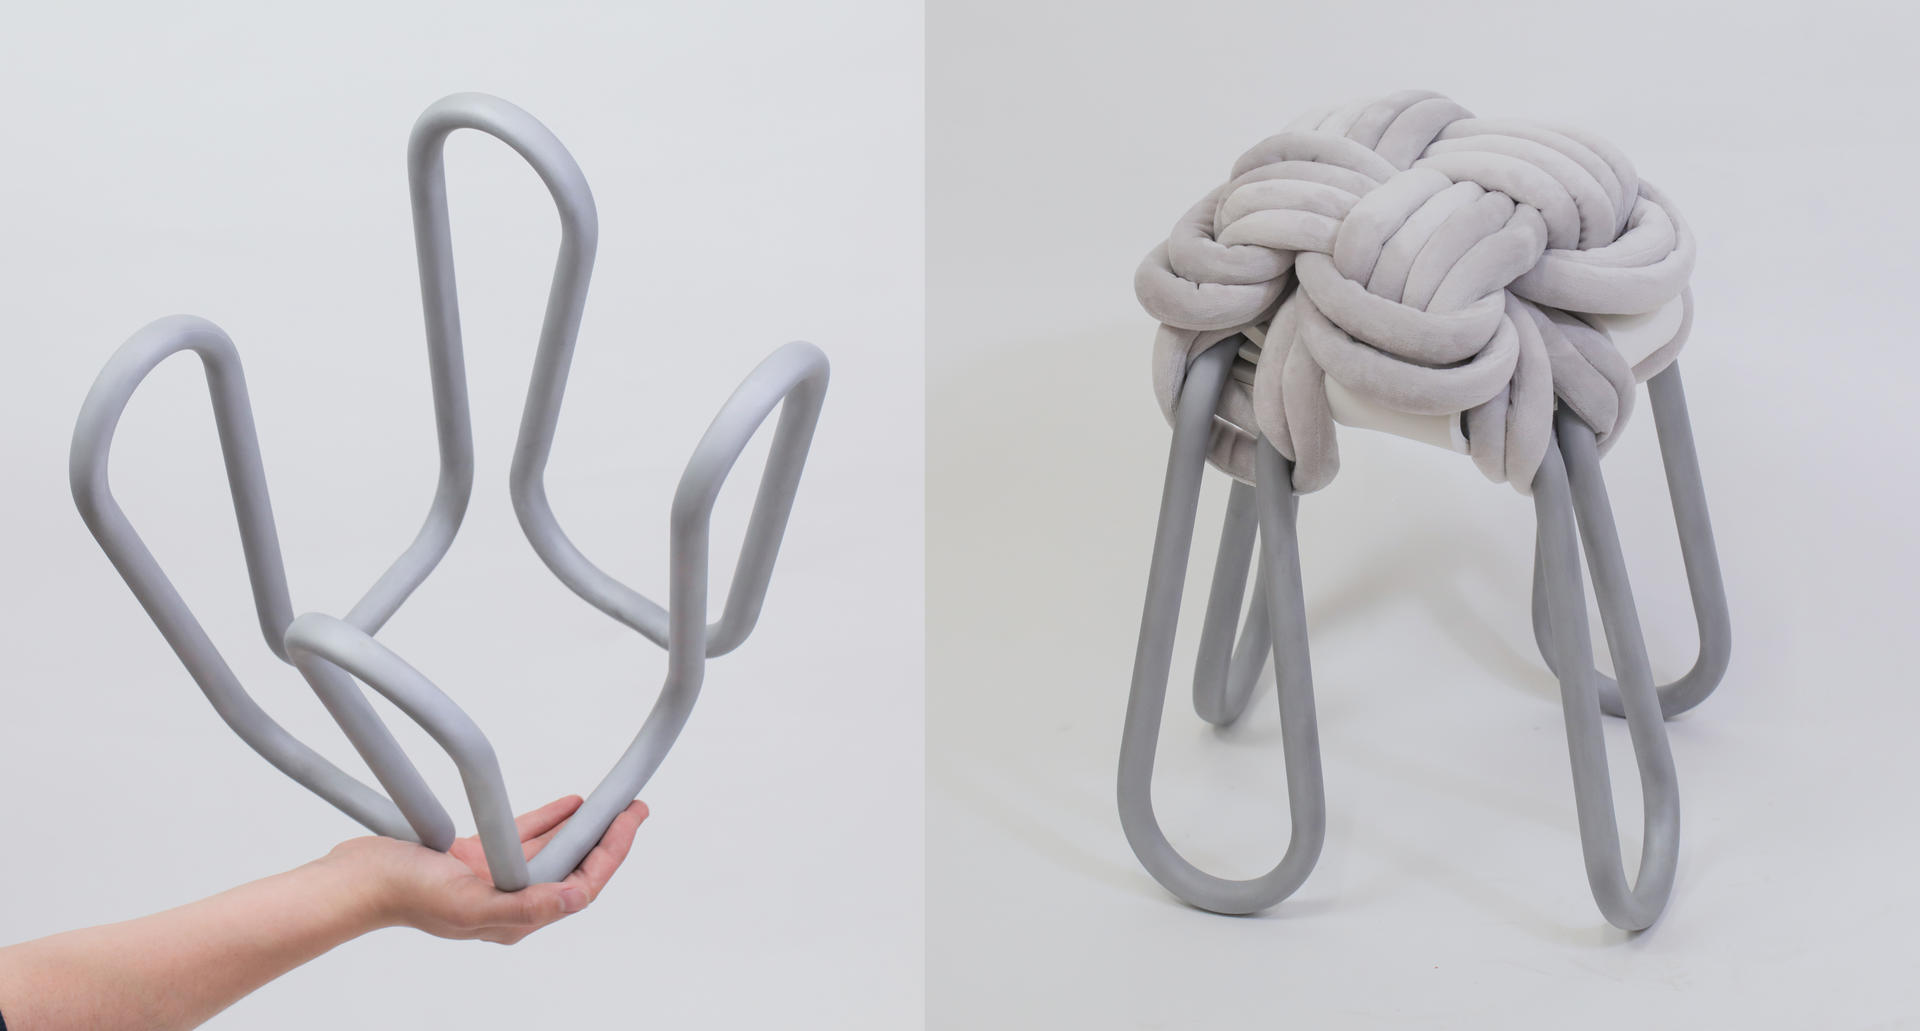 A hand is holding a loop-shaped metal tube stool frame on the left and a grey knot stool on a white background on the right